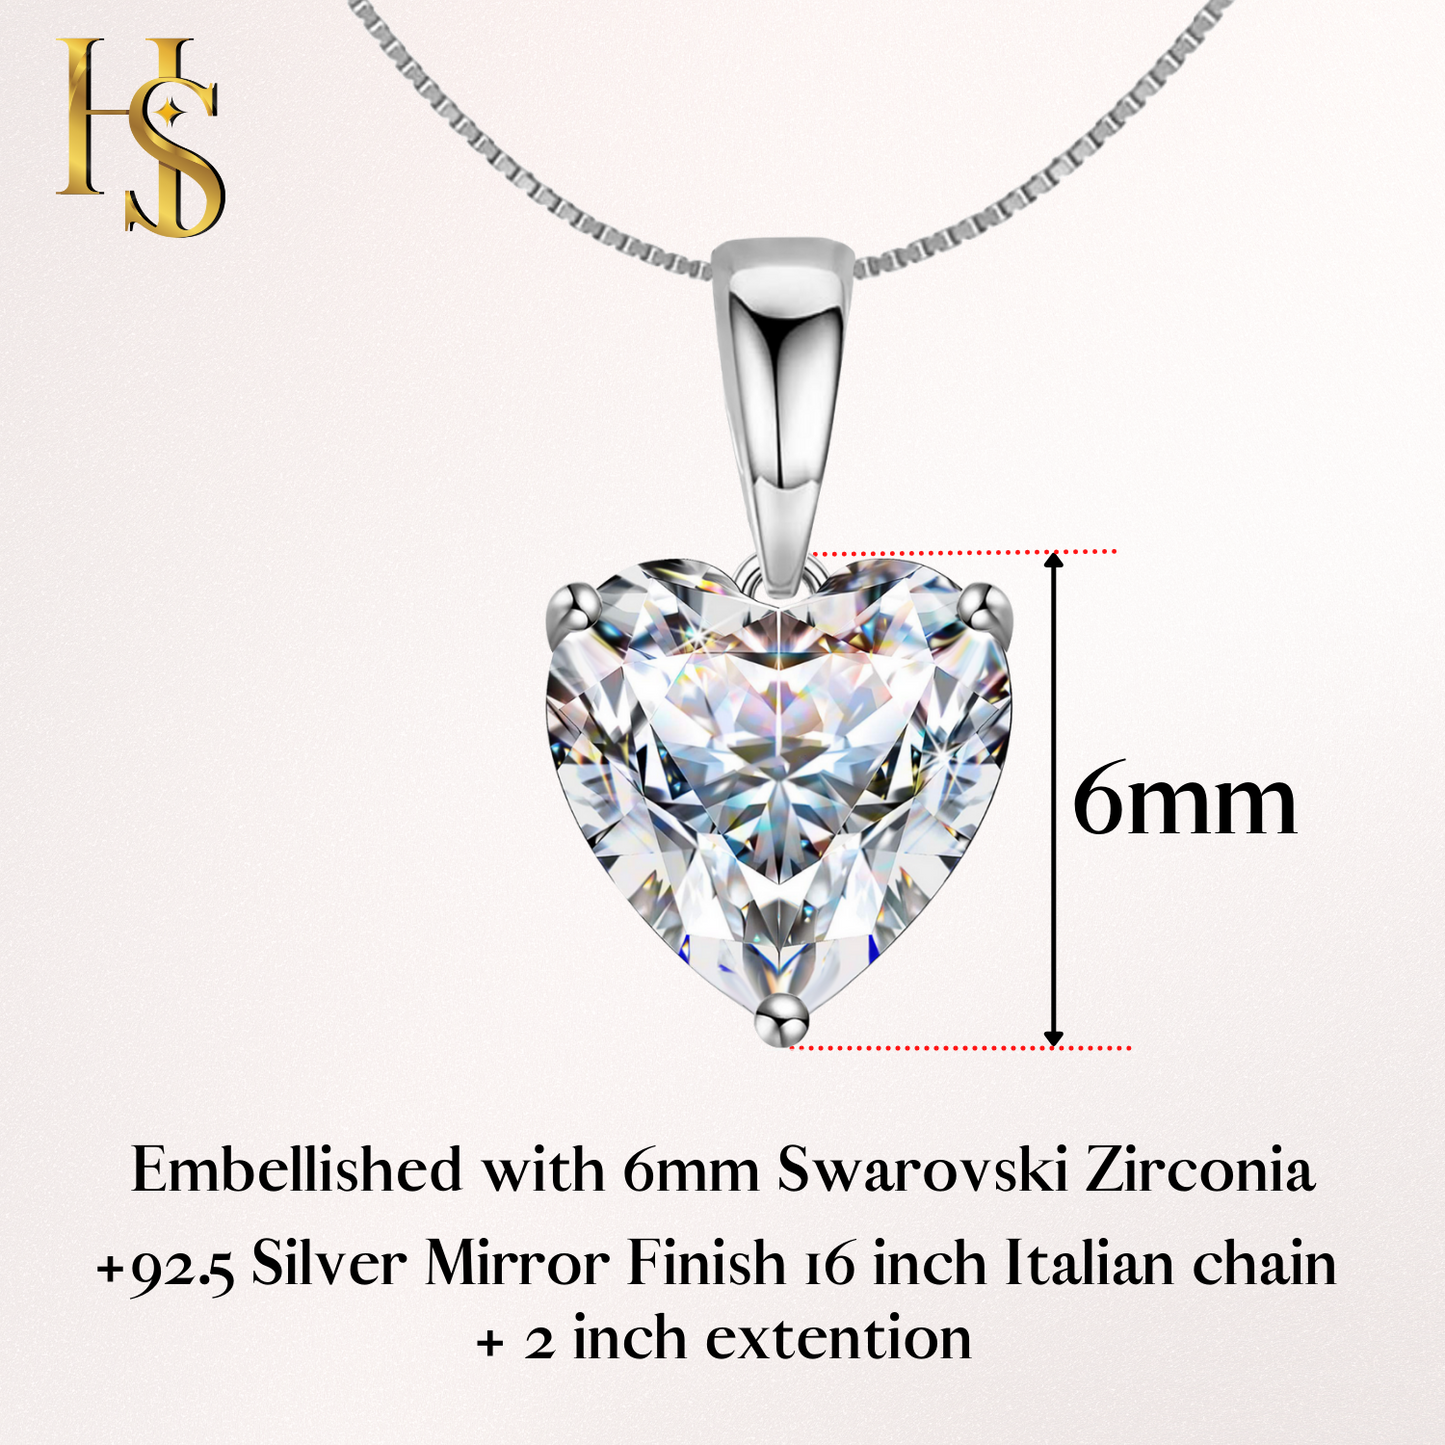 Heart Mini Solitaire Pendant with Chain in 92.5 Silver embellished with Swarovski Zirconia